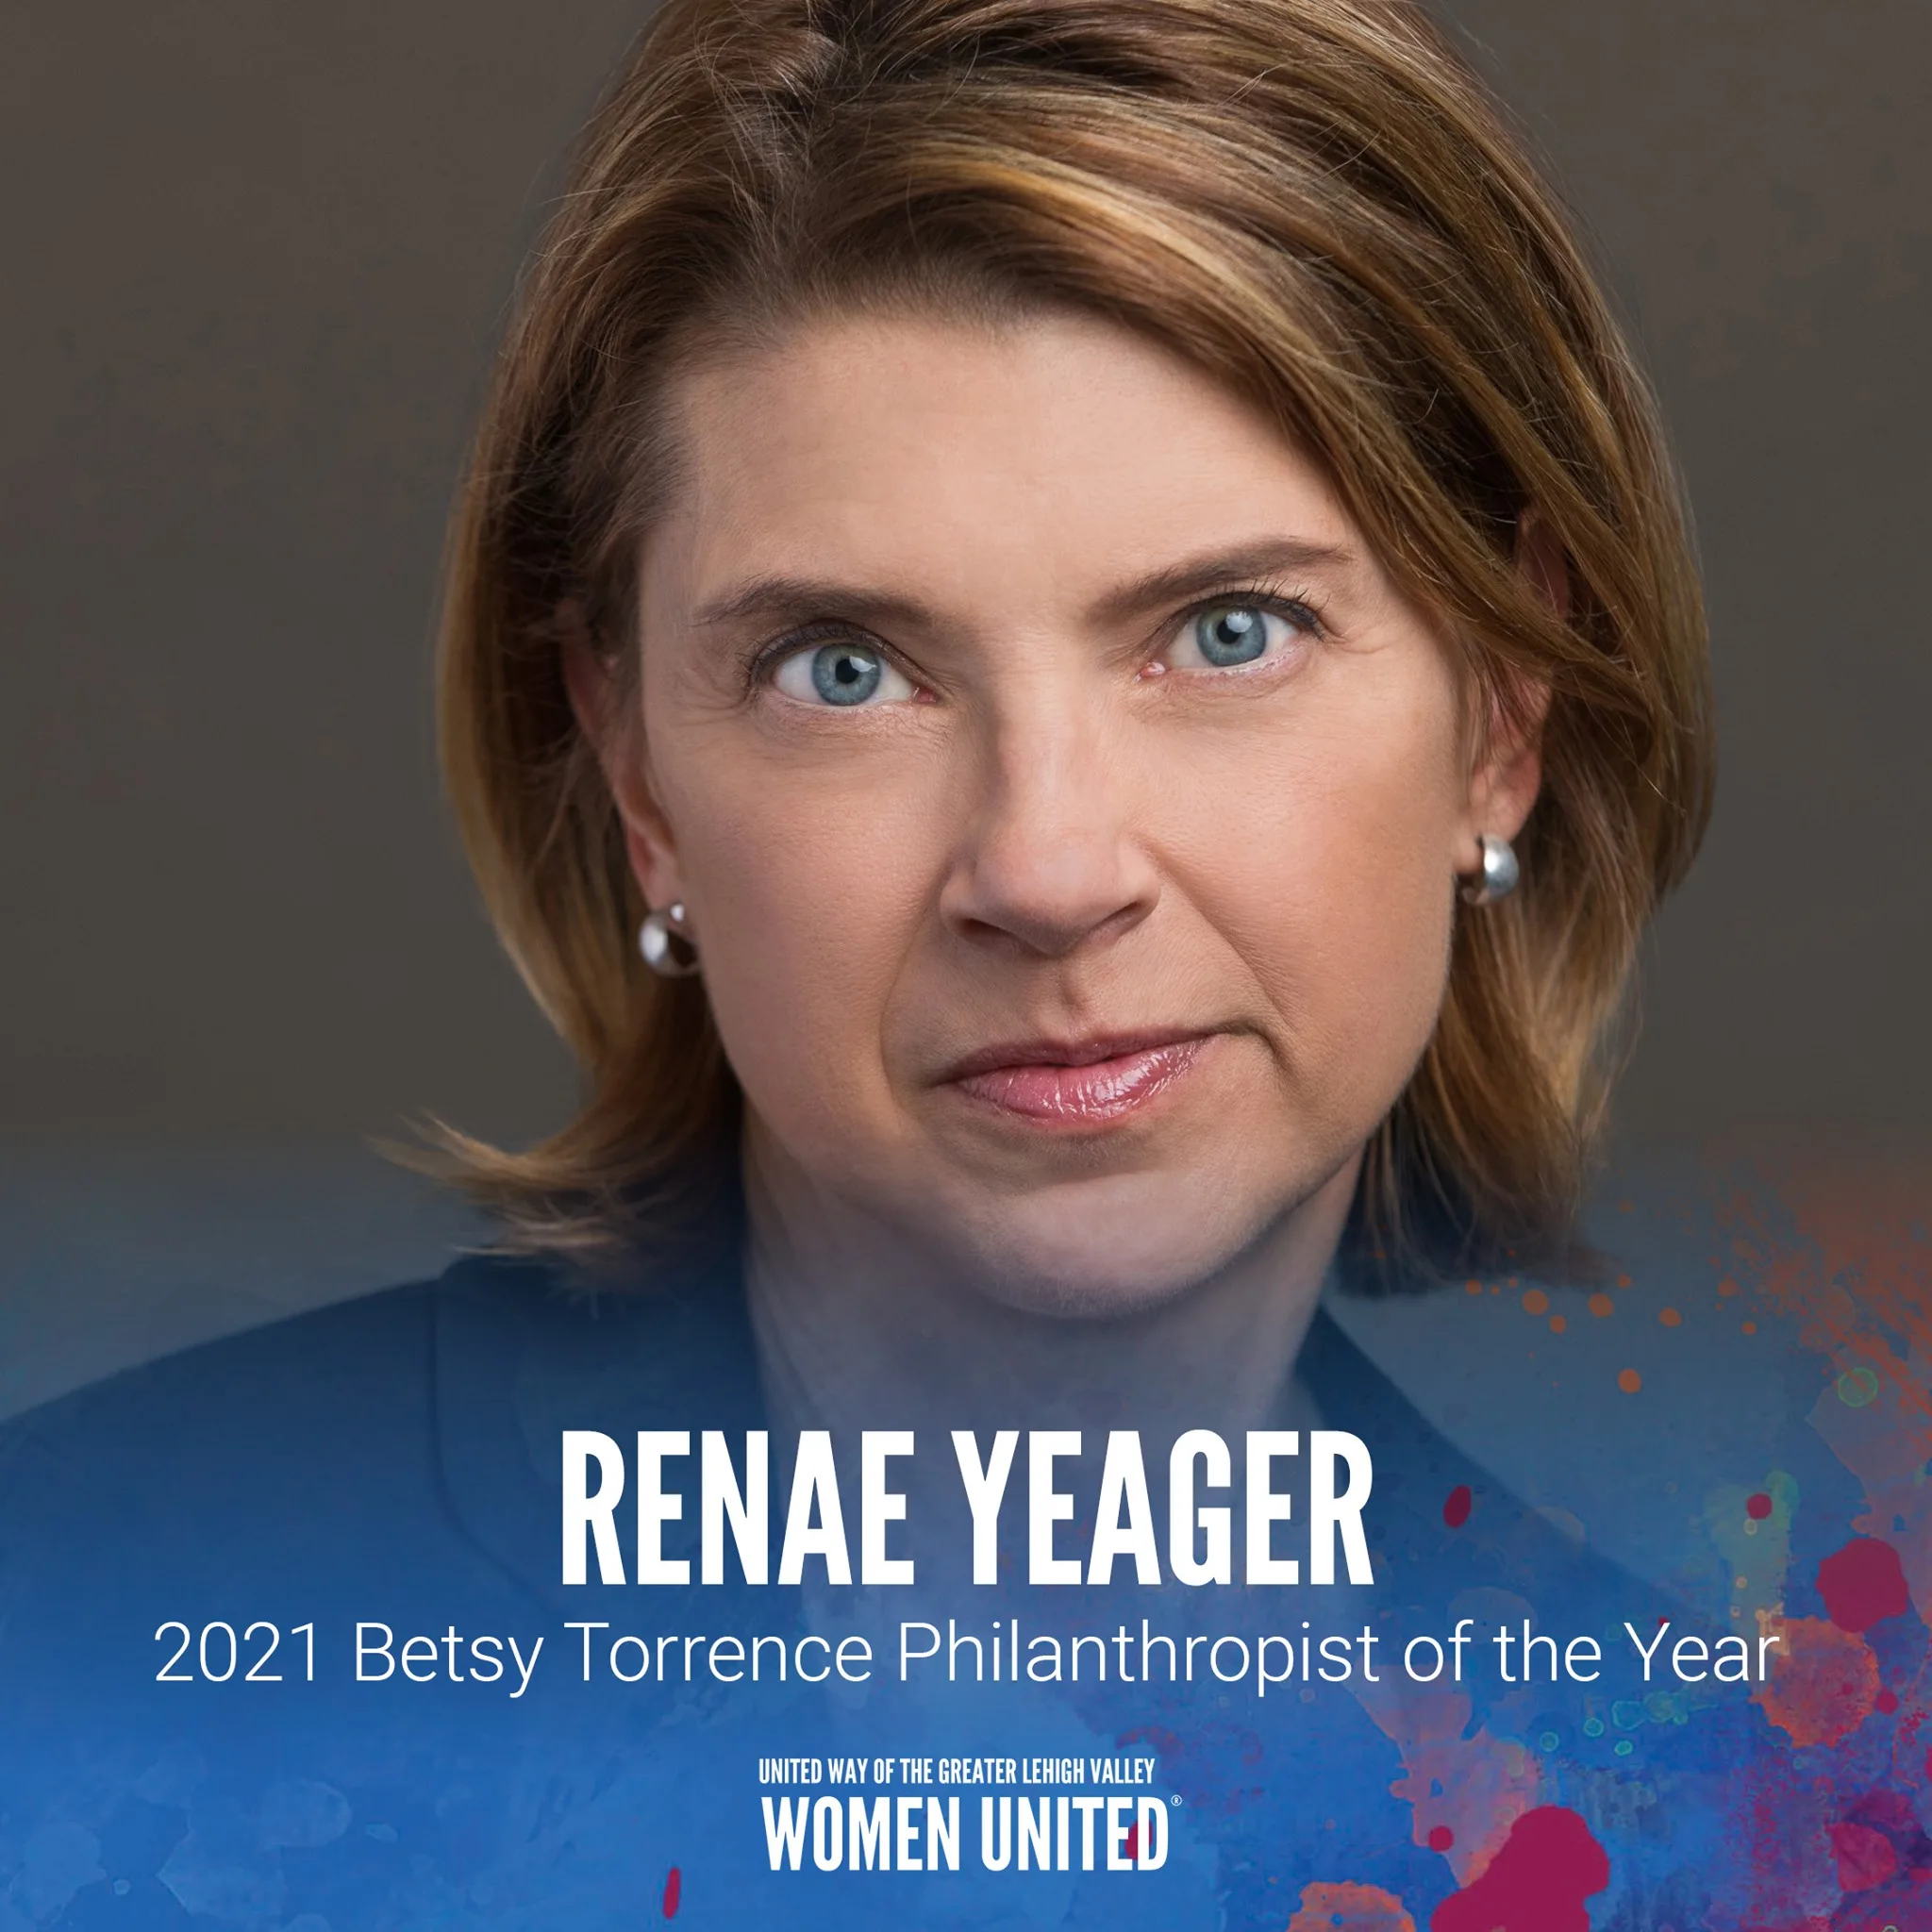 Renae Yeager, 2021 Betsy Torrence Philanthropist of the Year Award